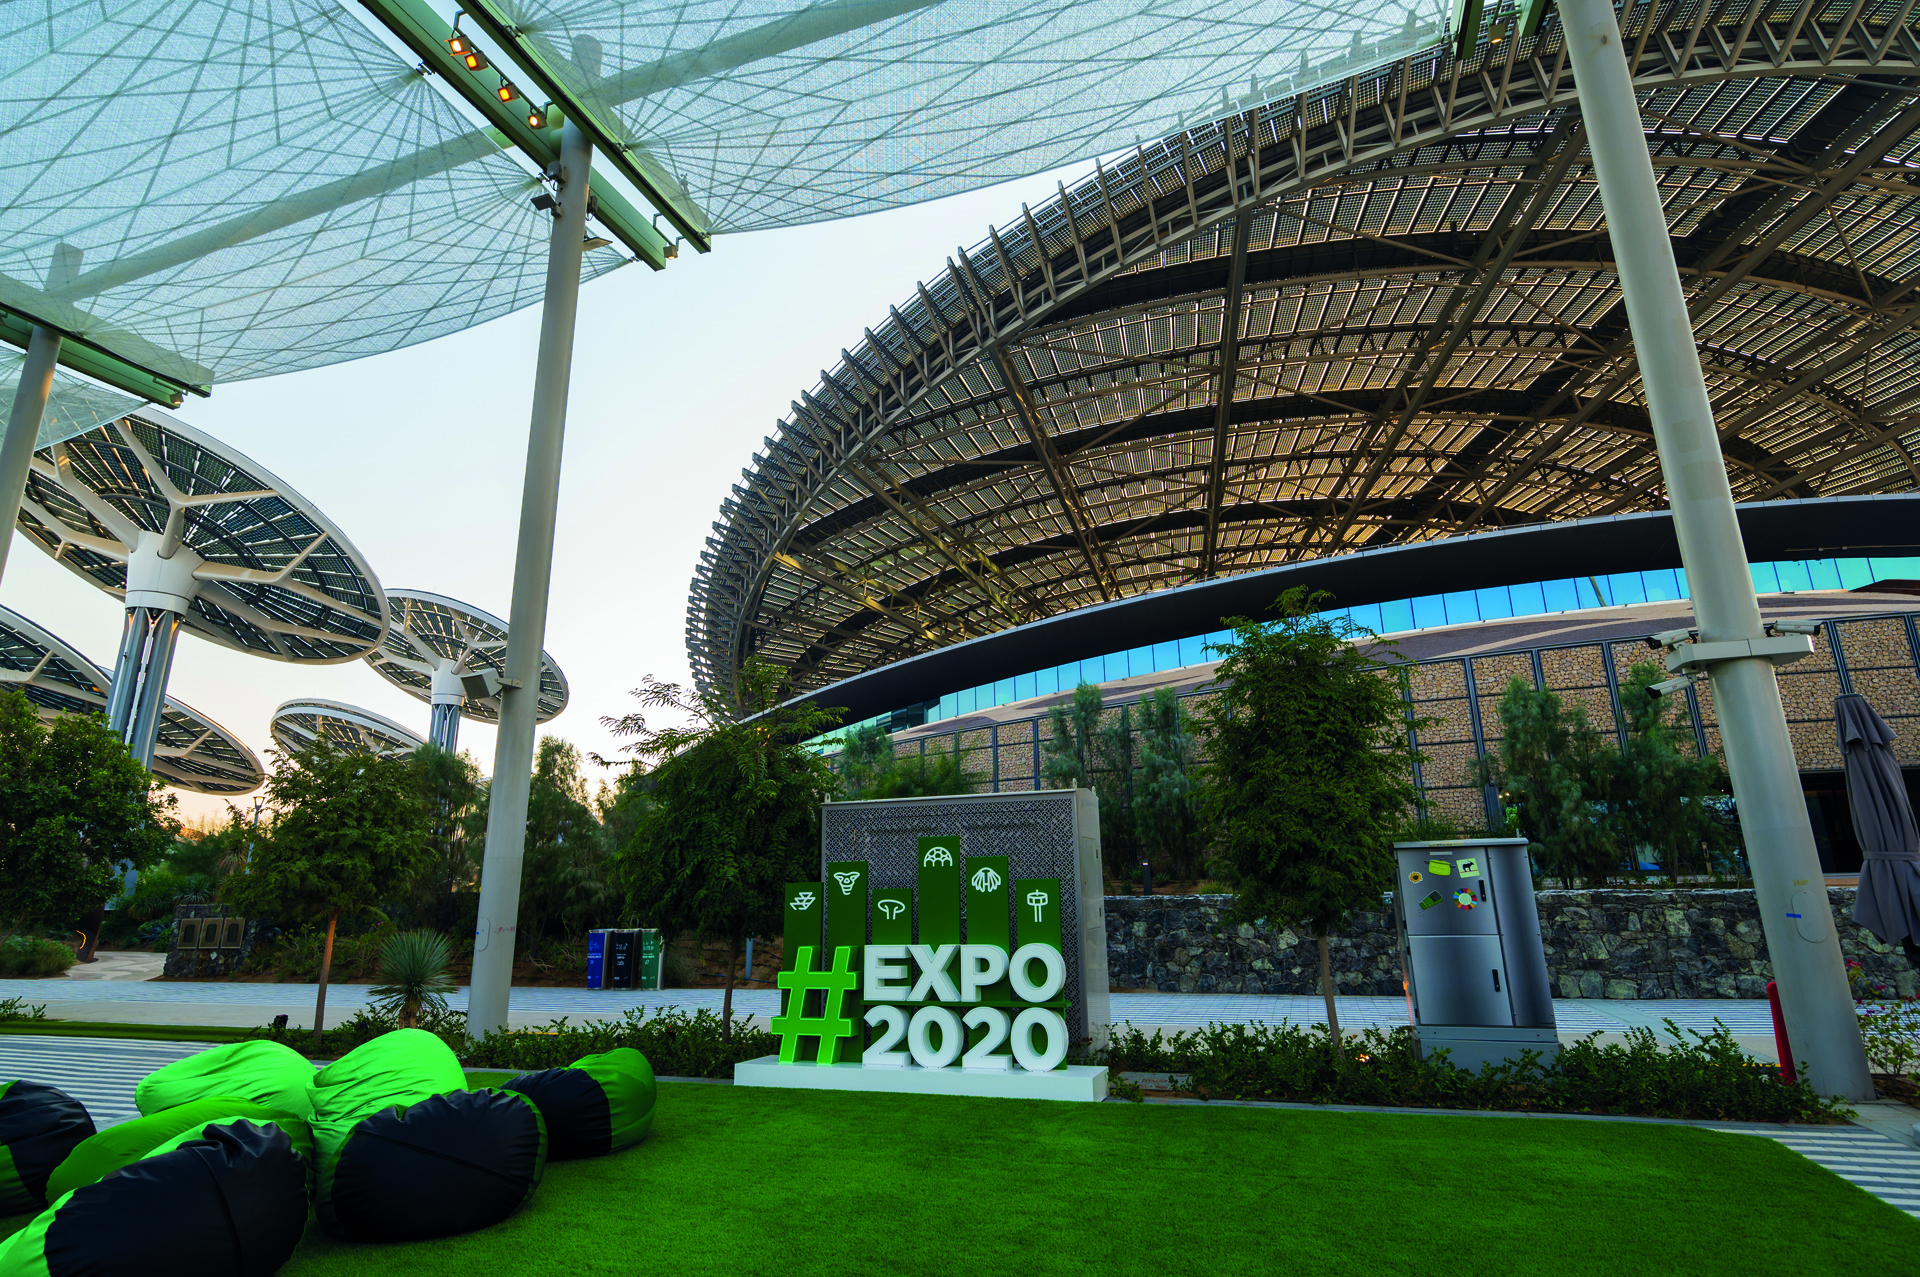 Dubai, United Arab Emirates - February 4, 2020: Characteristic architecture of EXPO 2020 Terra Sustainability Pavilion for the postponed EXPO which will be held in 2021 in Dubai, United Arab Emirates